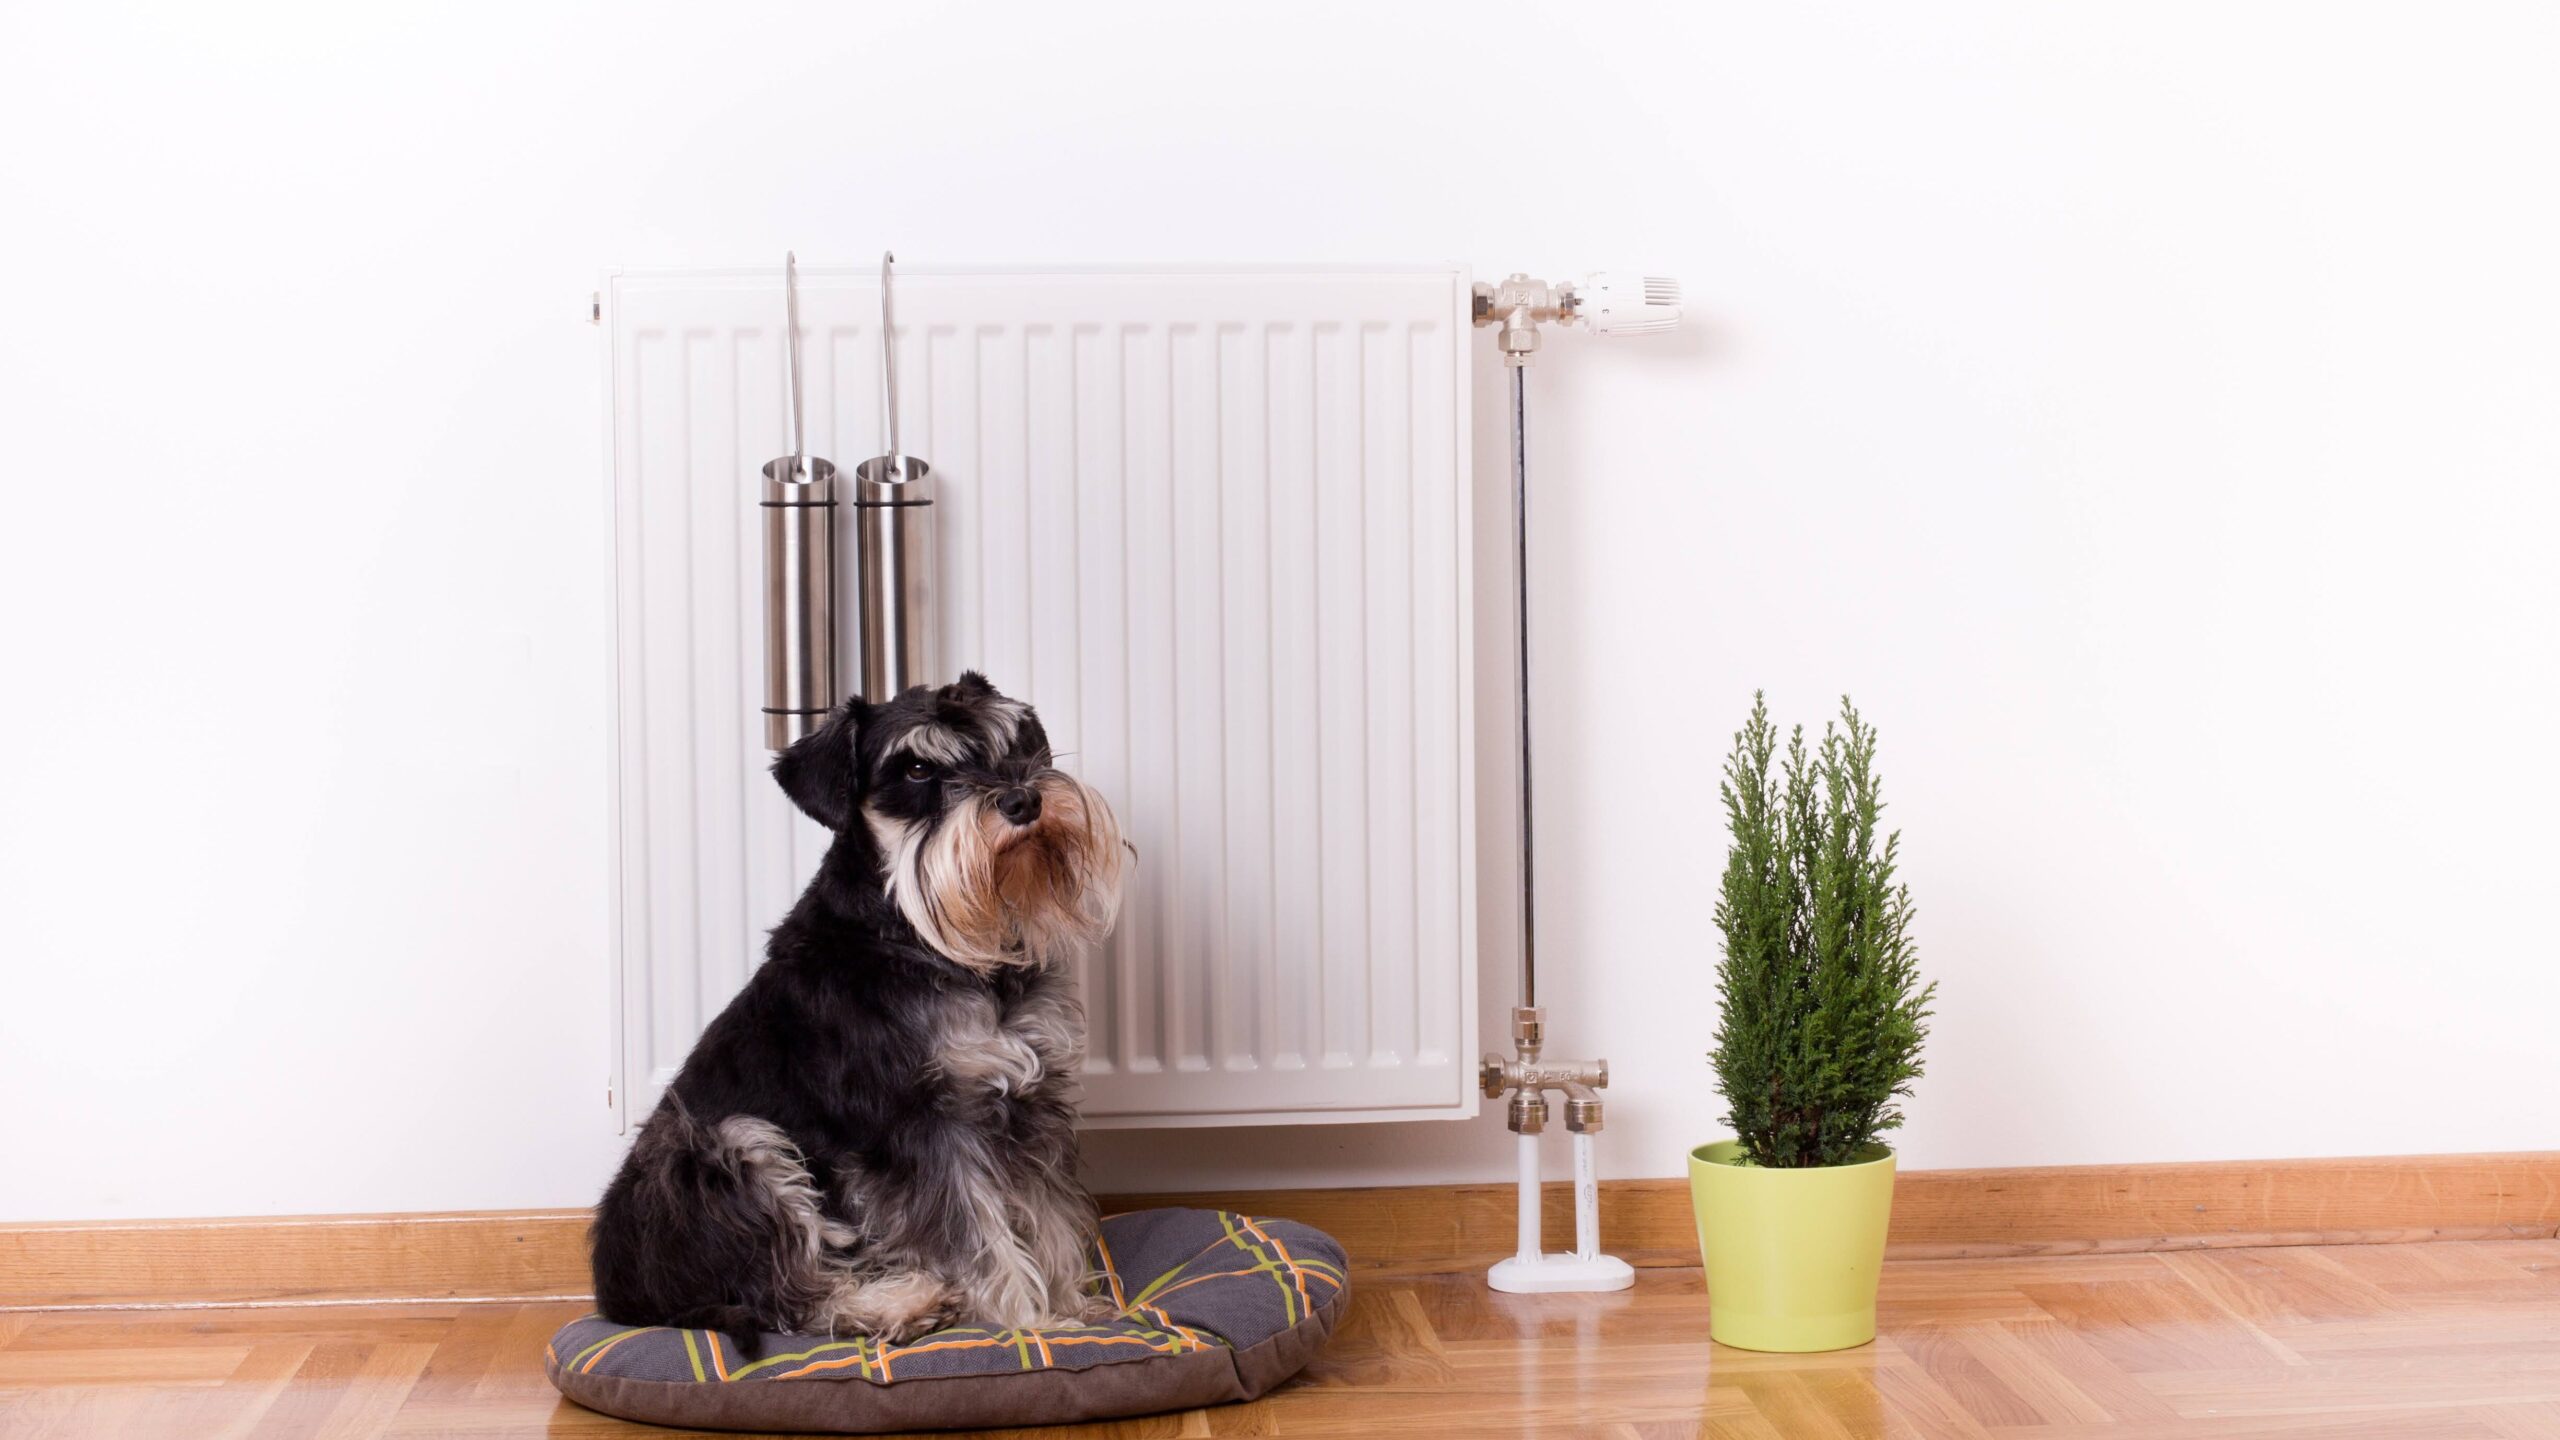 Good indoor climate concept. Dog sitting on the pillow in front of radiator with water containers for steam